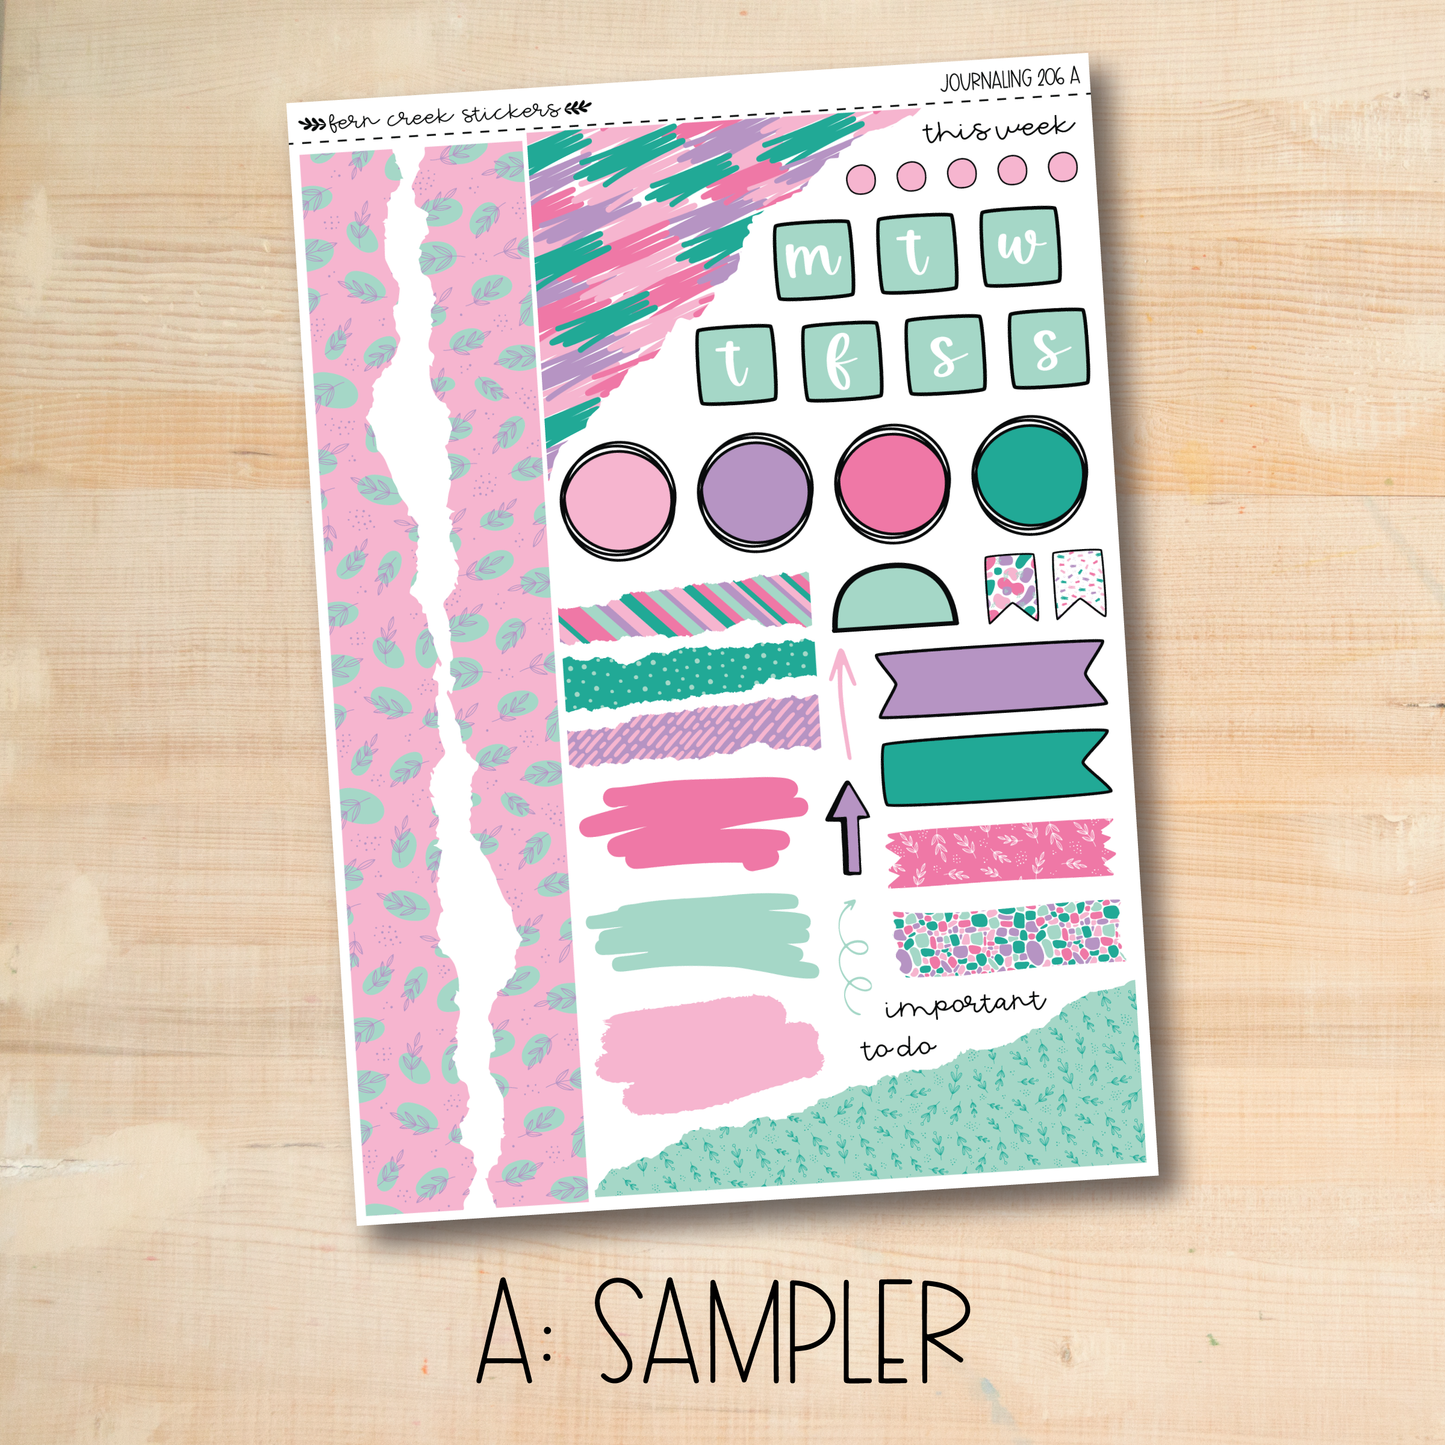 a sample of a sticker sheet with different shapes and sizes